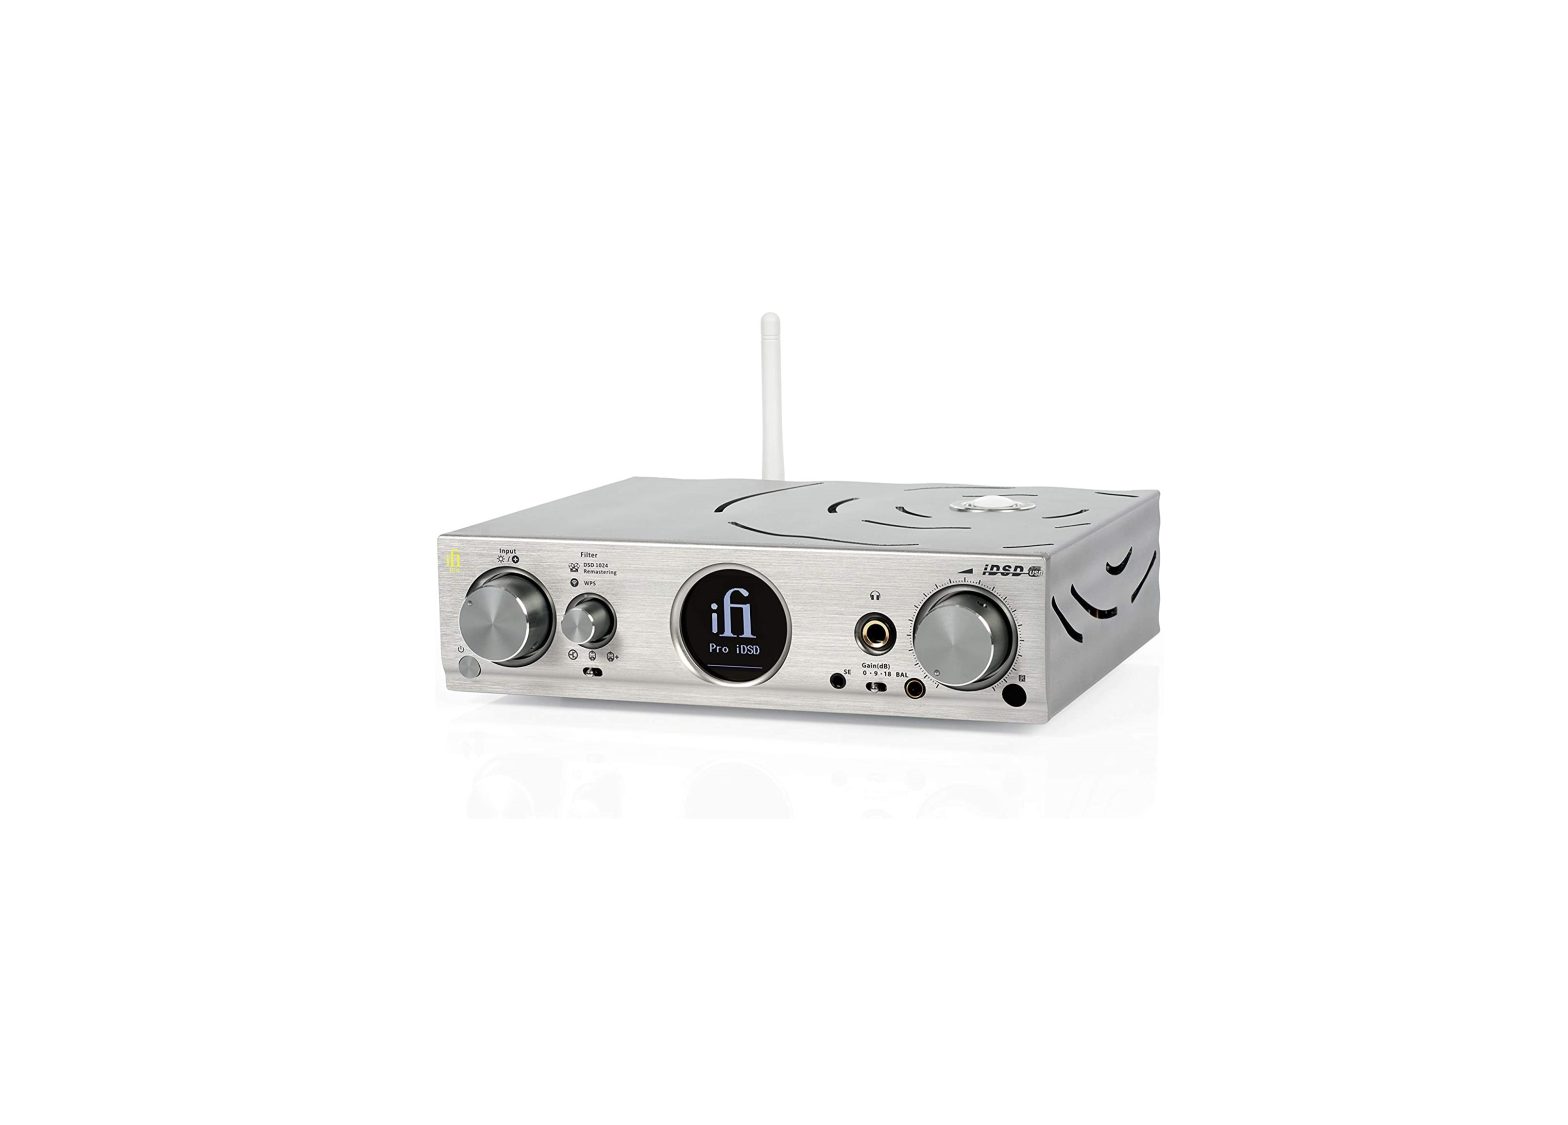 DSD1024 Pro iDSD DAC and Headphone Amplifier User Manual